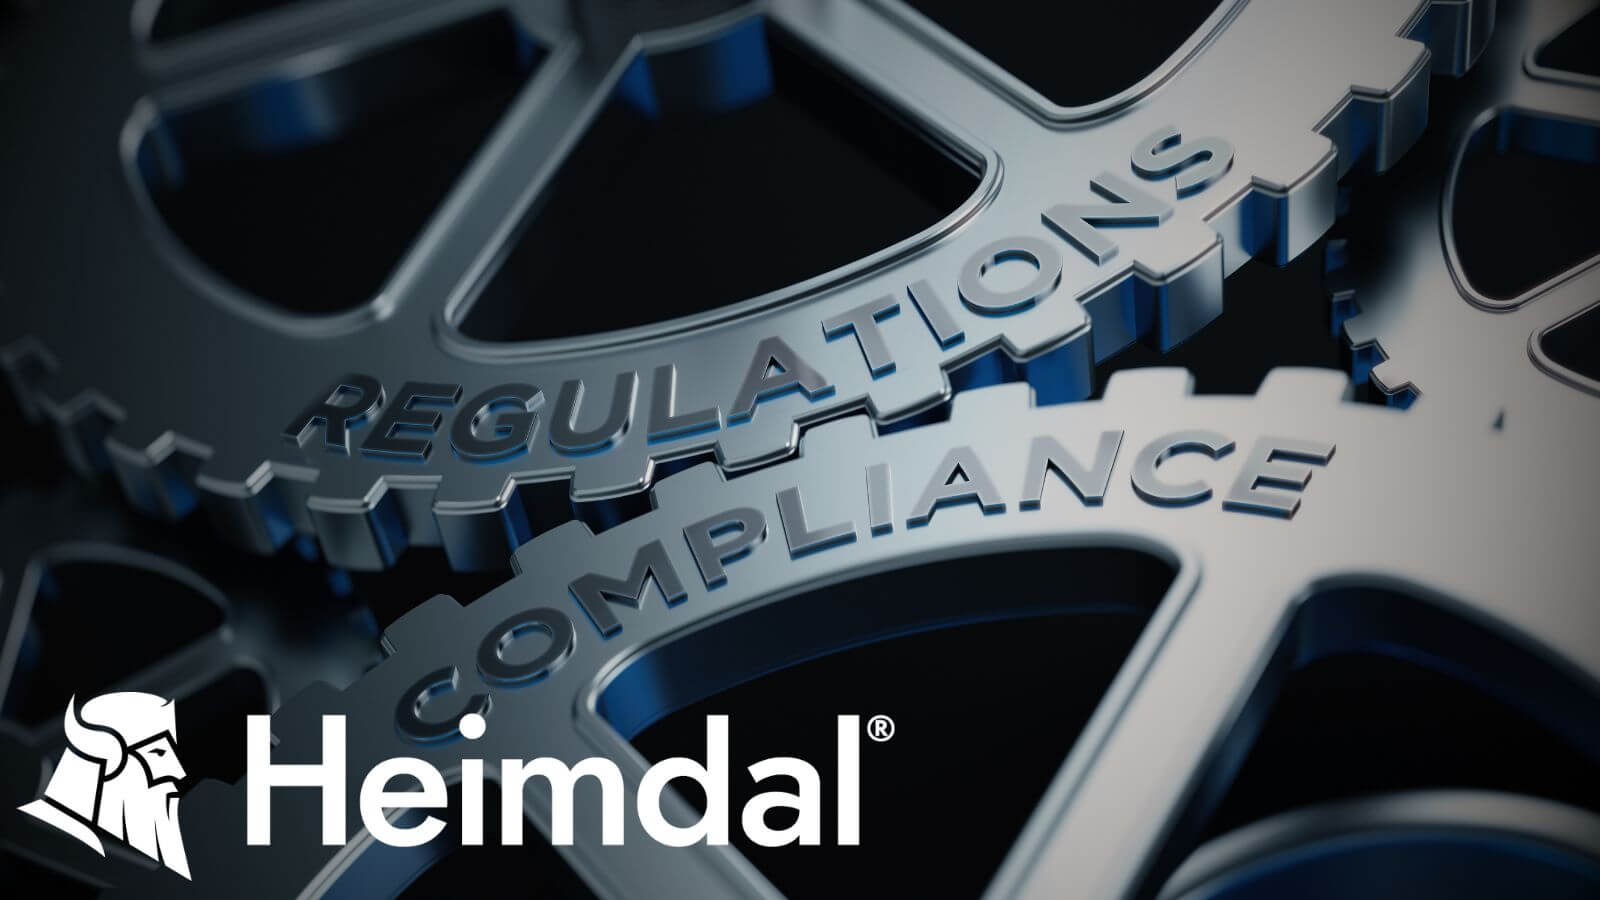 The Crucial Role of Cyber Essentials in the UK Public Sector – Source: heimdalsecurity.com